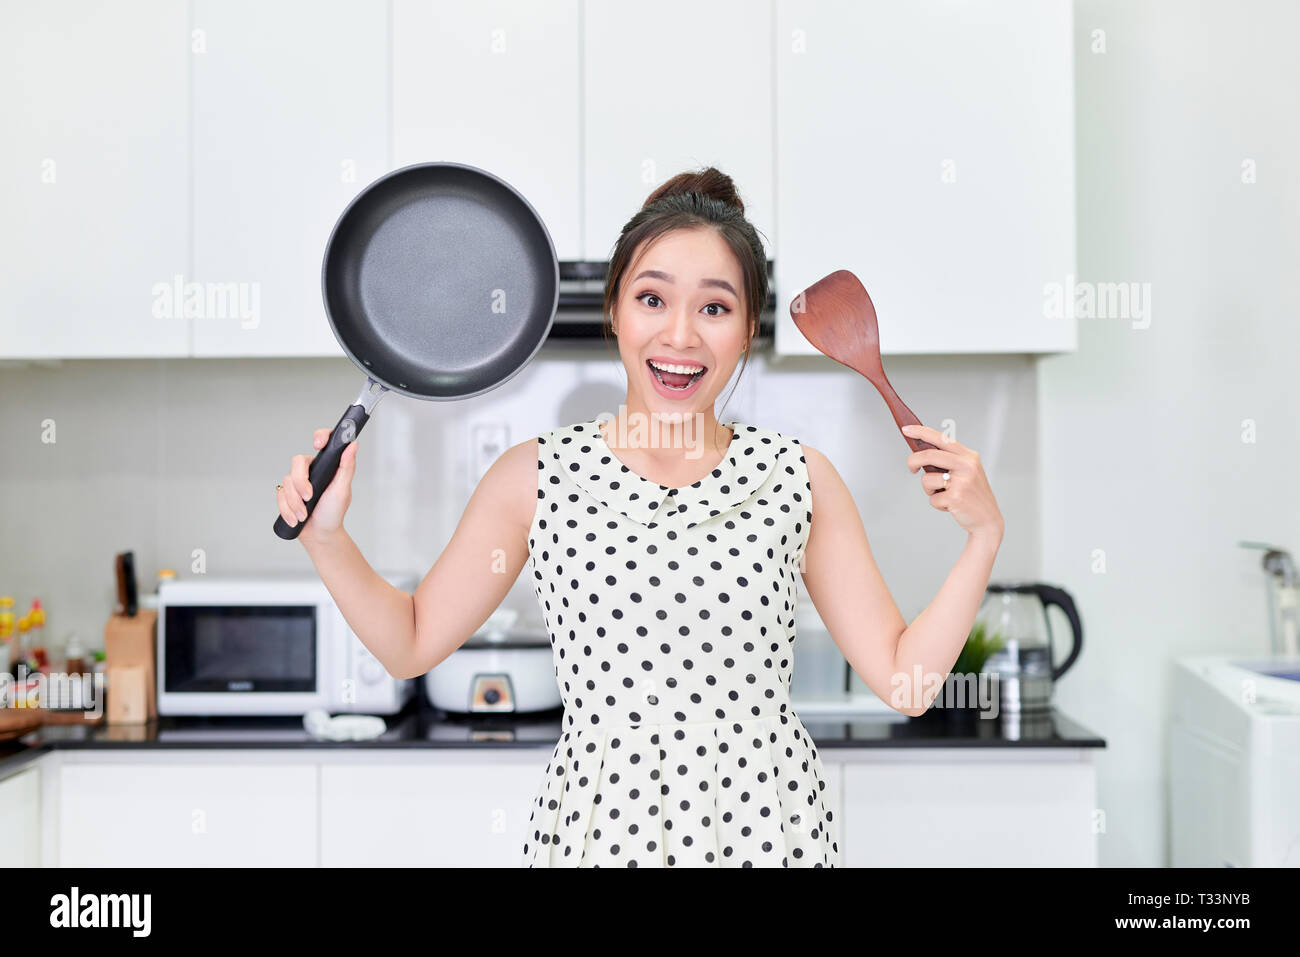 Young woman showing a pan and a spatula Stock Photo